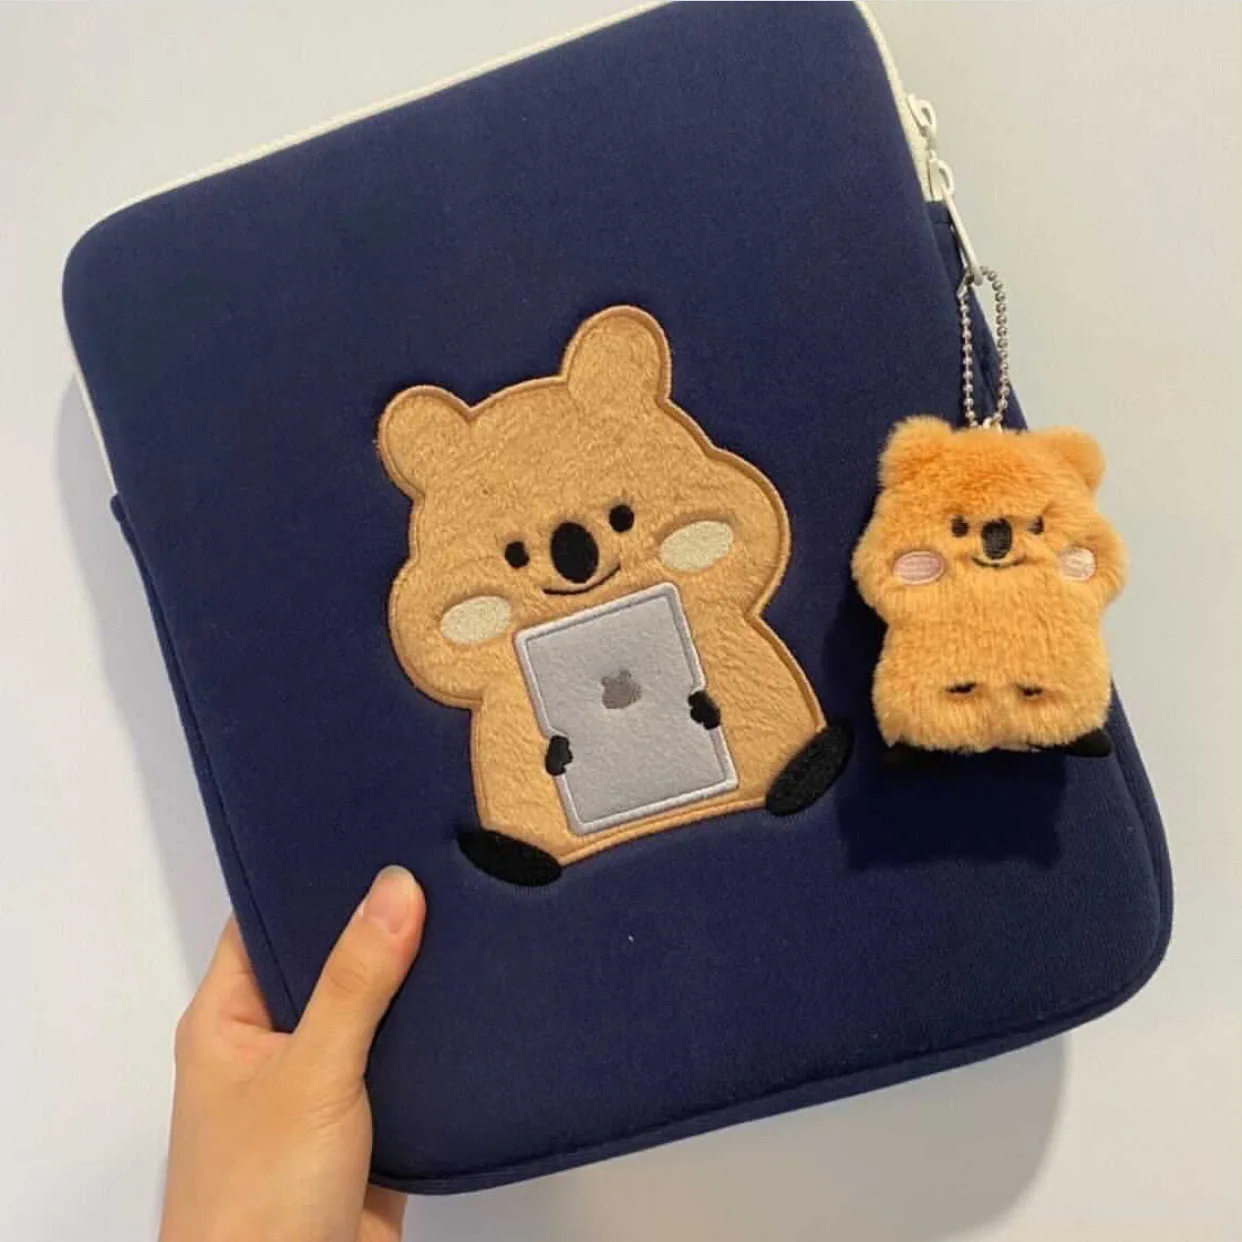 Ins Cute Laptop Case Protective Sleeve for Macbook Pro/air Matebook E 2022 Storage Pouch Ipad Air 5 Samsung Tab Soft Cover Bag